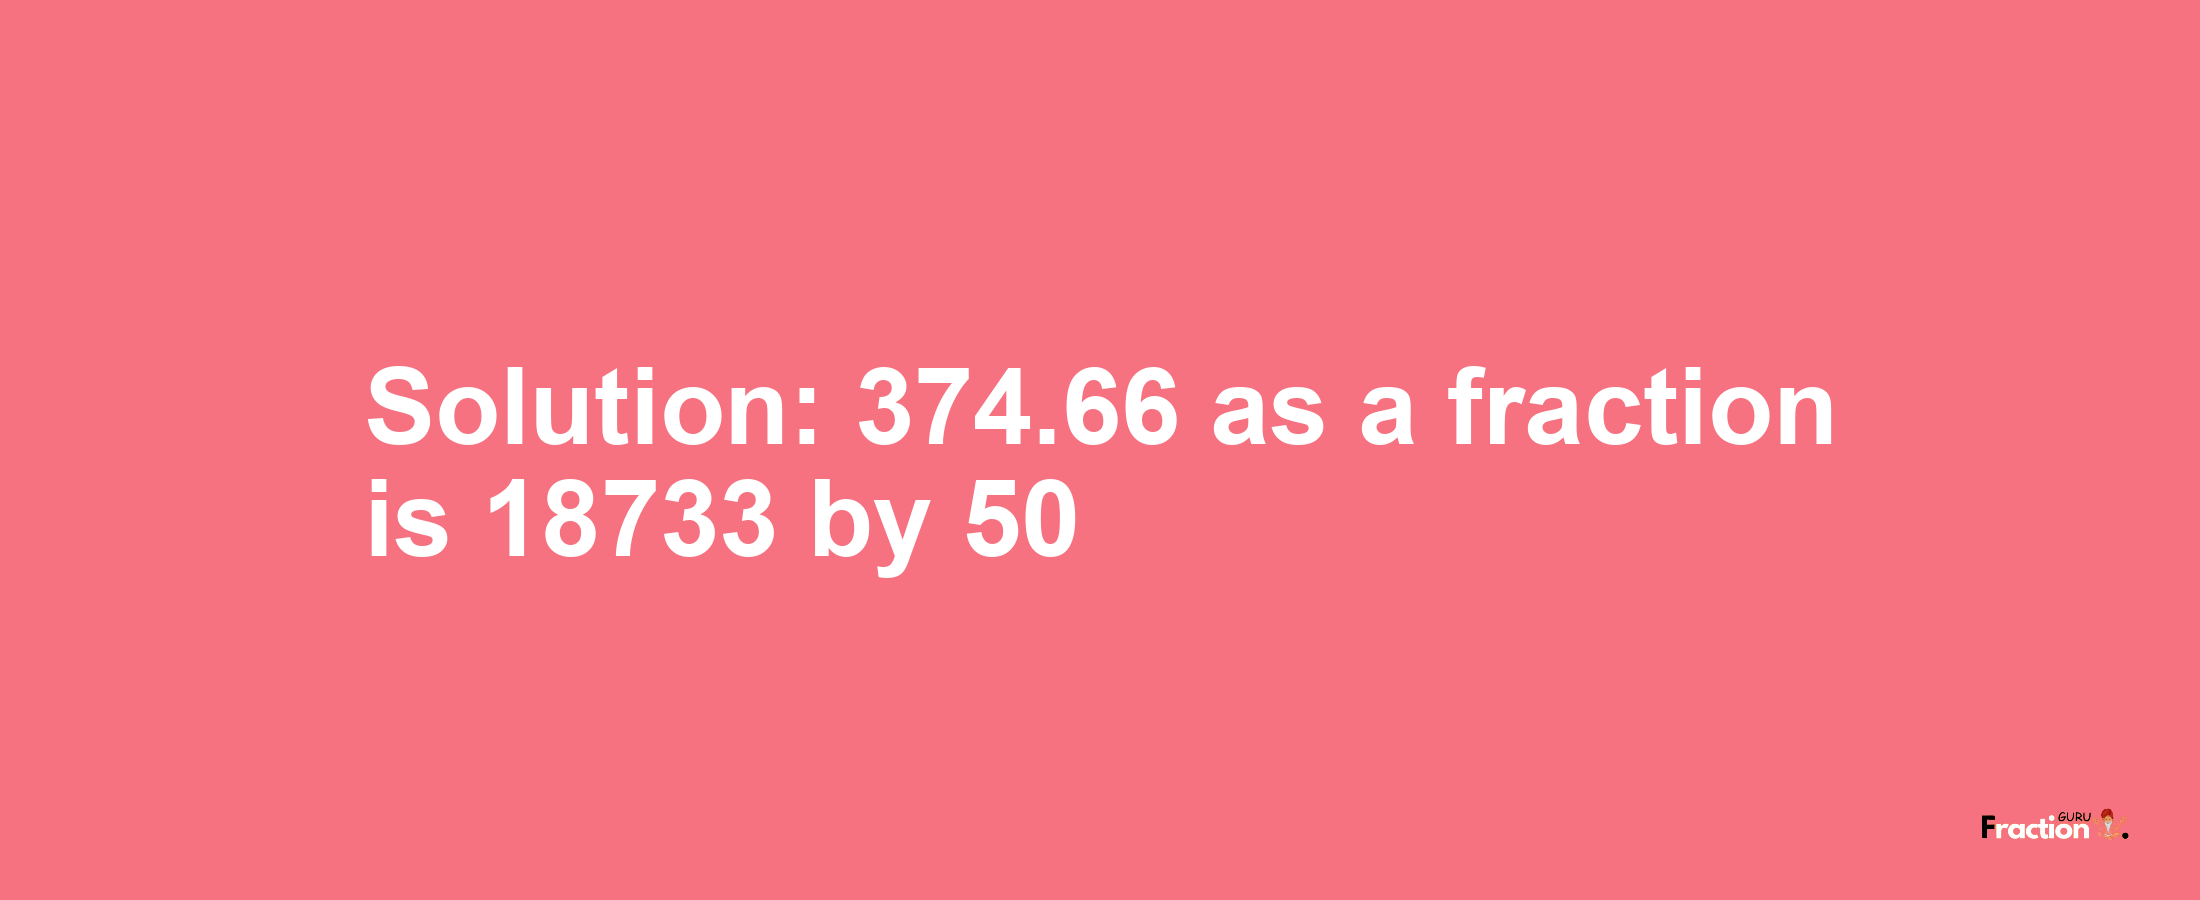 Solution:374.66 as a fraction is 18733/50